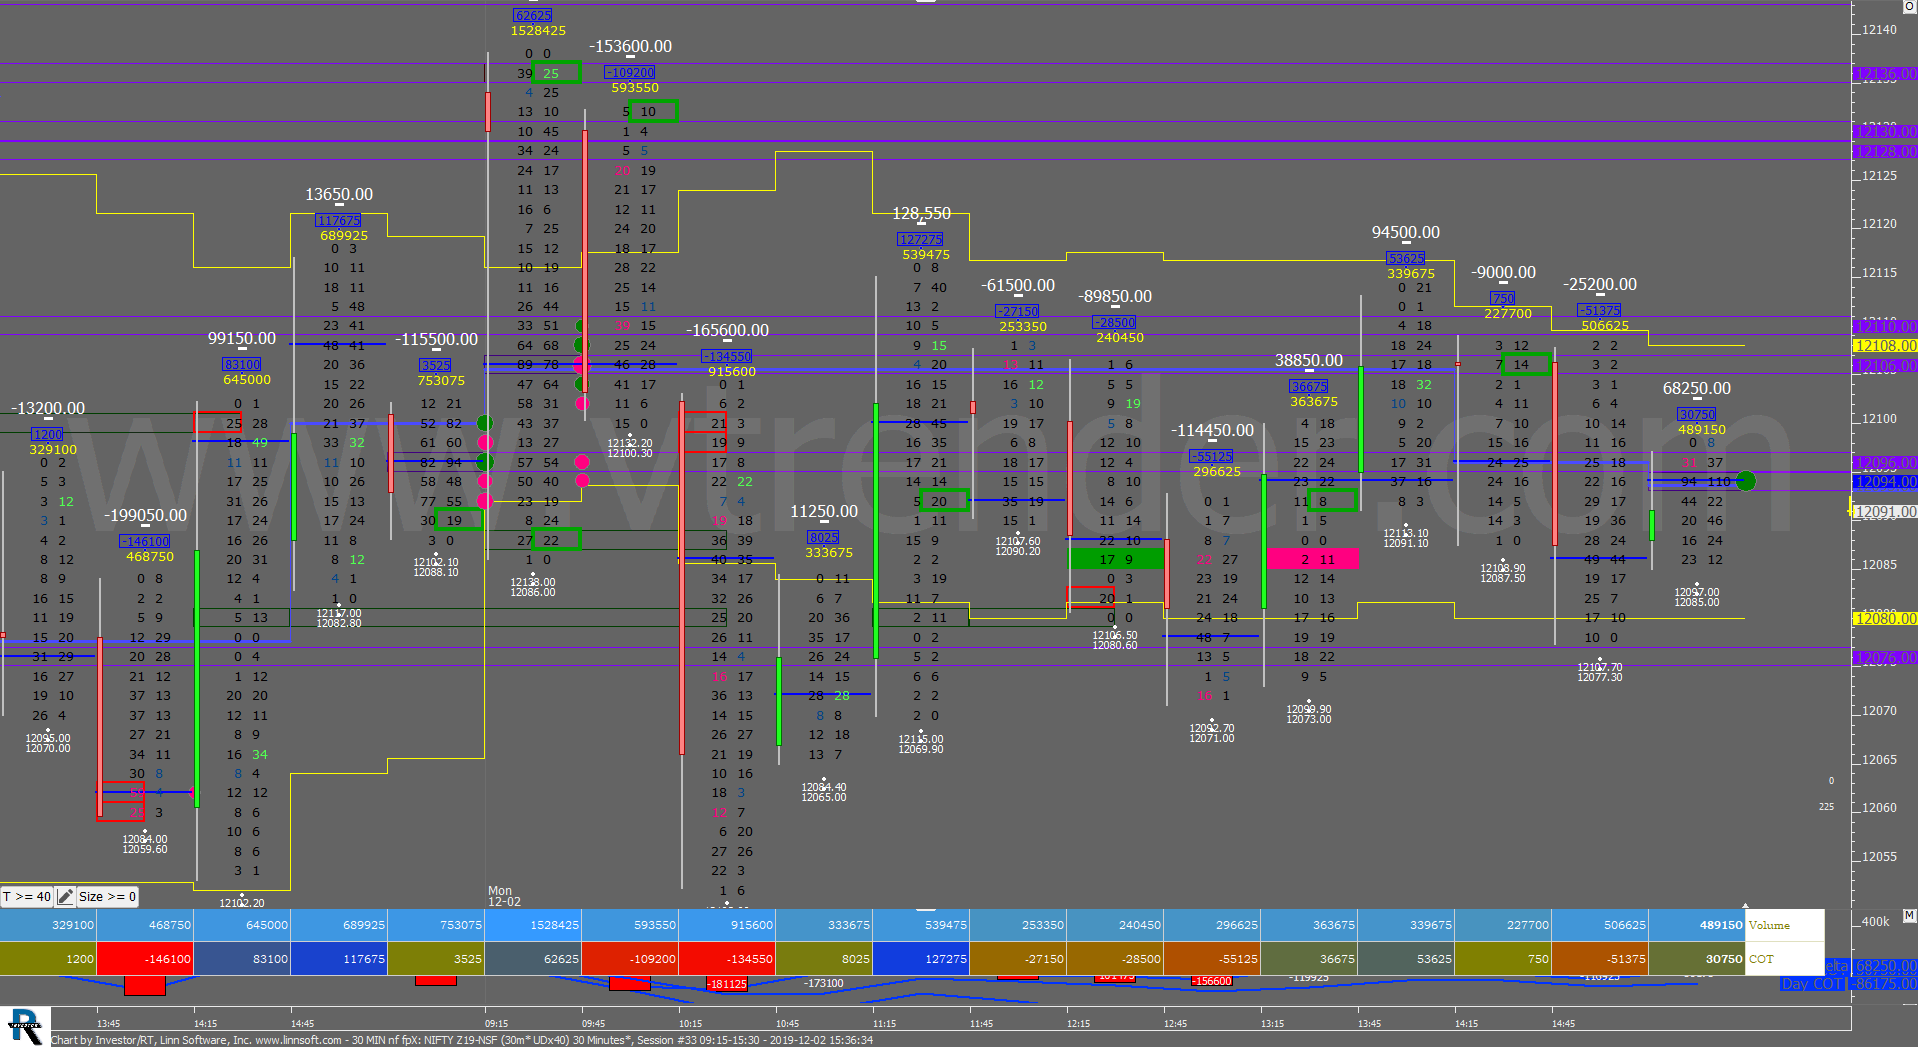 30 Min Nf Fpx Order Flow Charts Dated 2Nd Dec Banknifty Futures, Day Trading, Intraday Trading, Intraday Trading Strategies, Nifty Futures, Order Flow Analysis, Support And Resistance, Trading Strategies, Volume Profile Trading